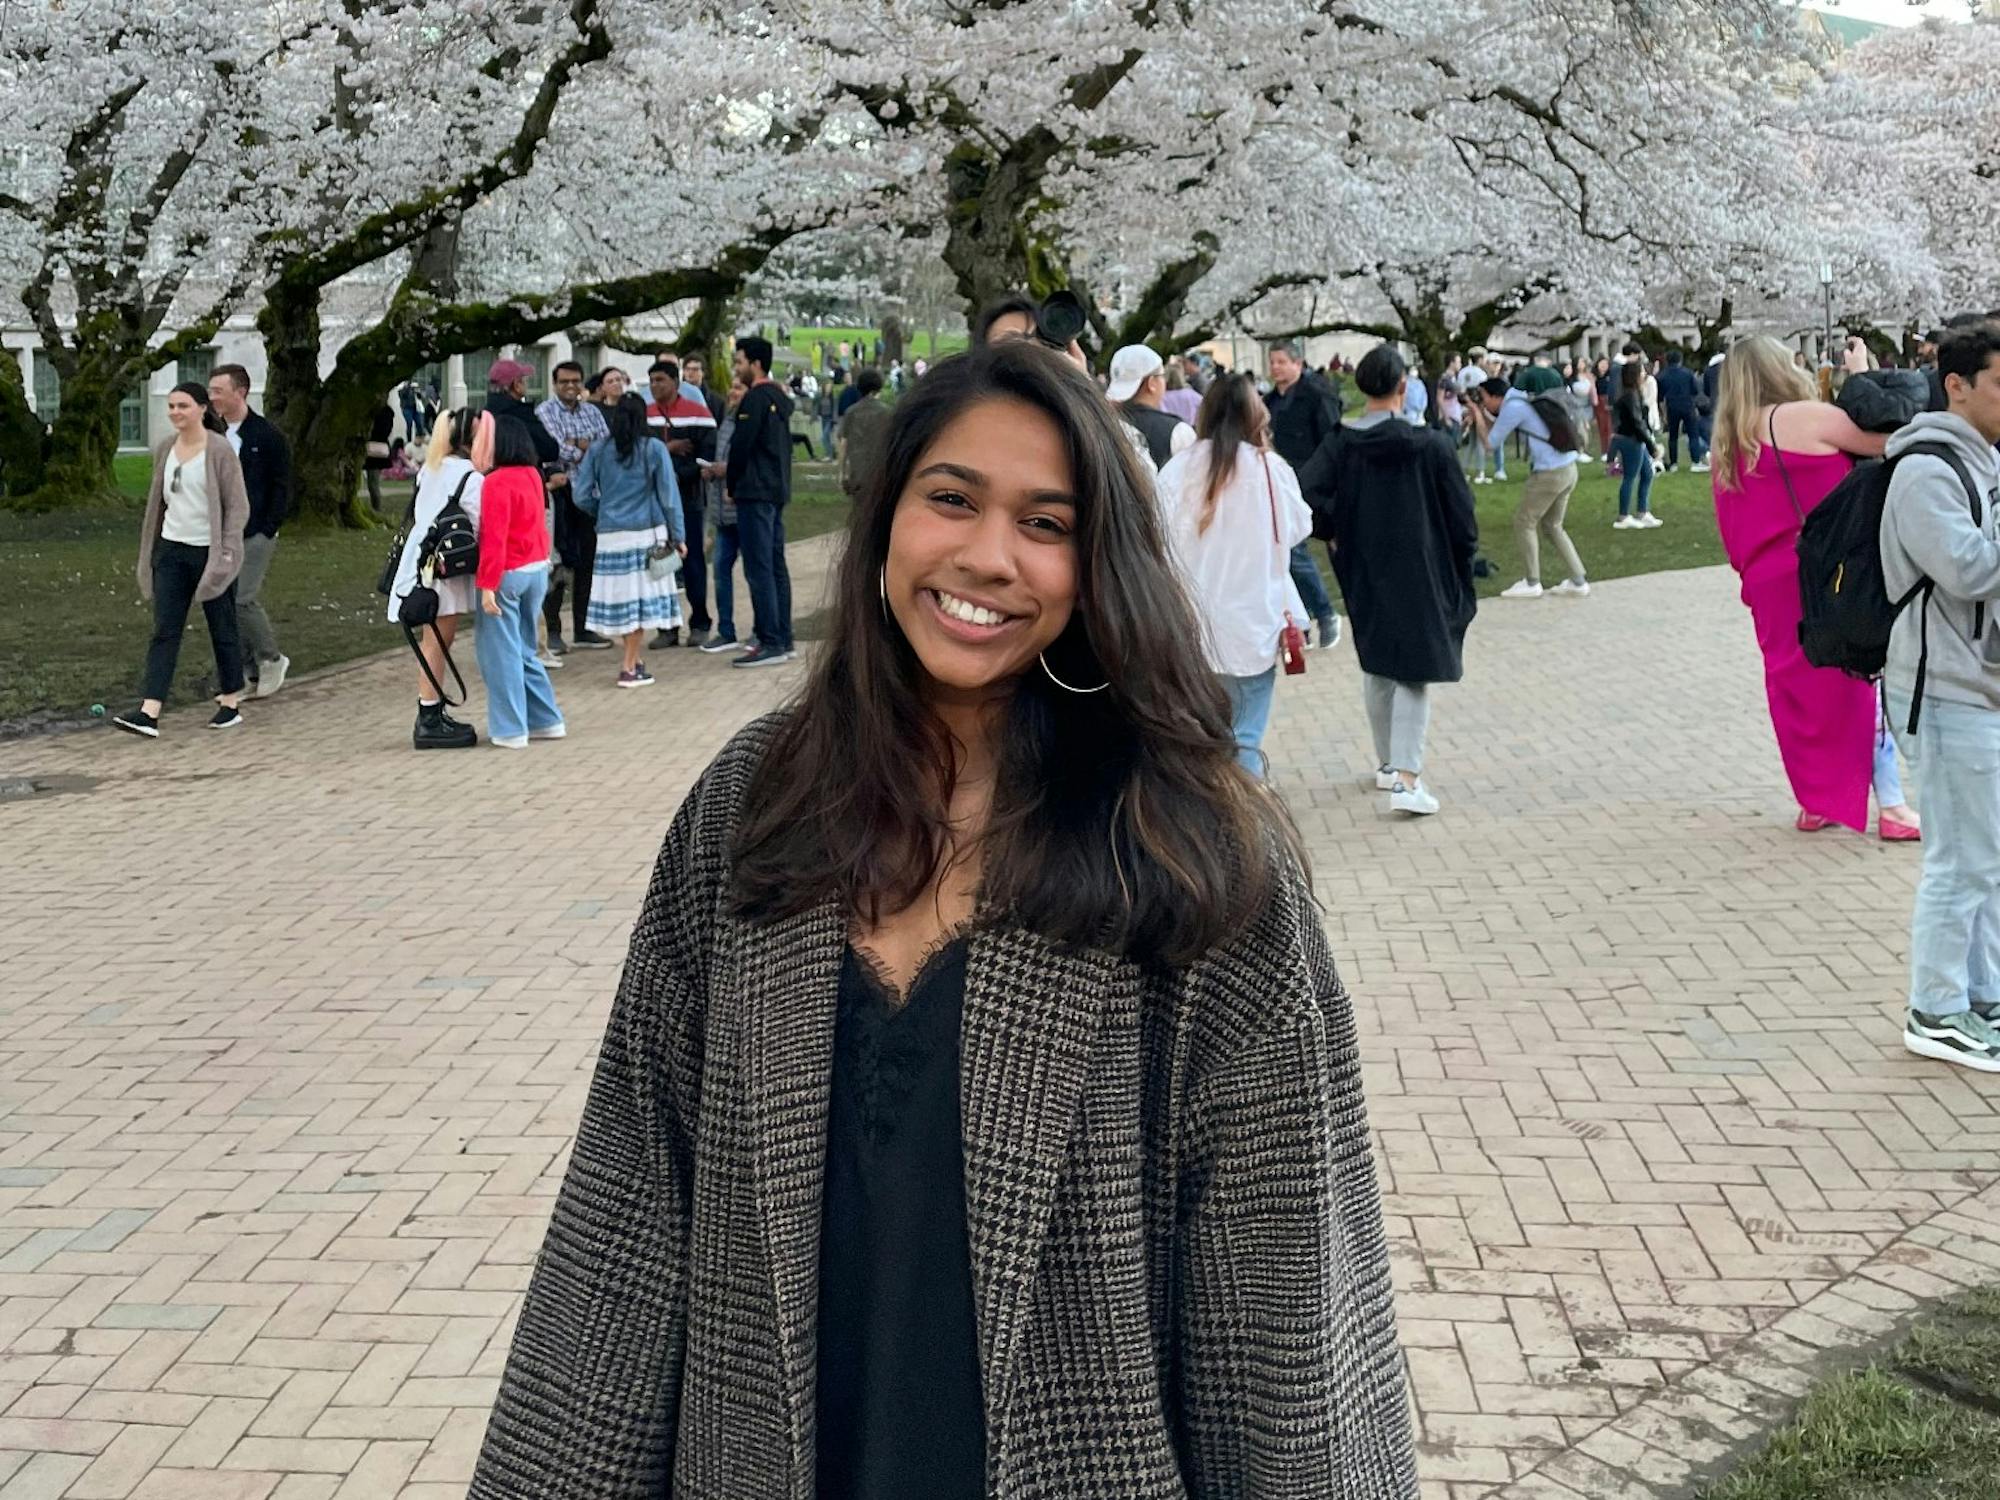 A young woman poses in front of a cherry blossom tree with people behind her